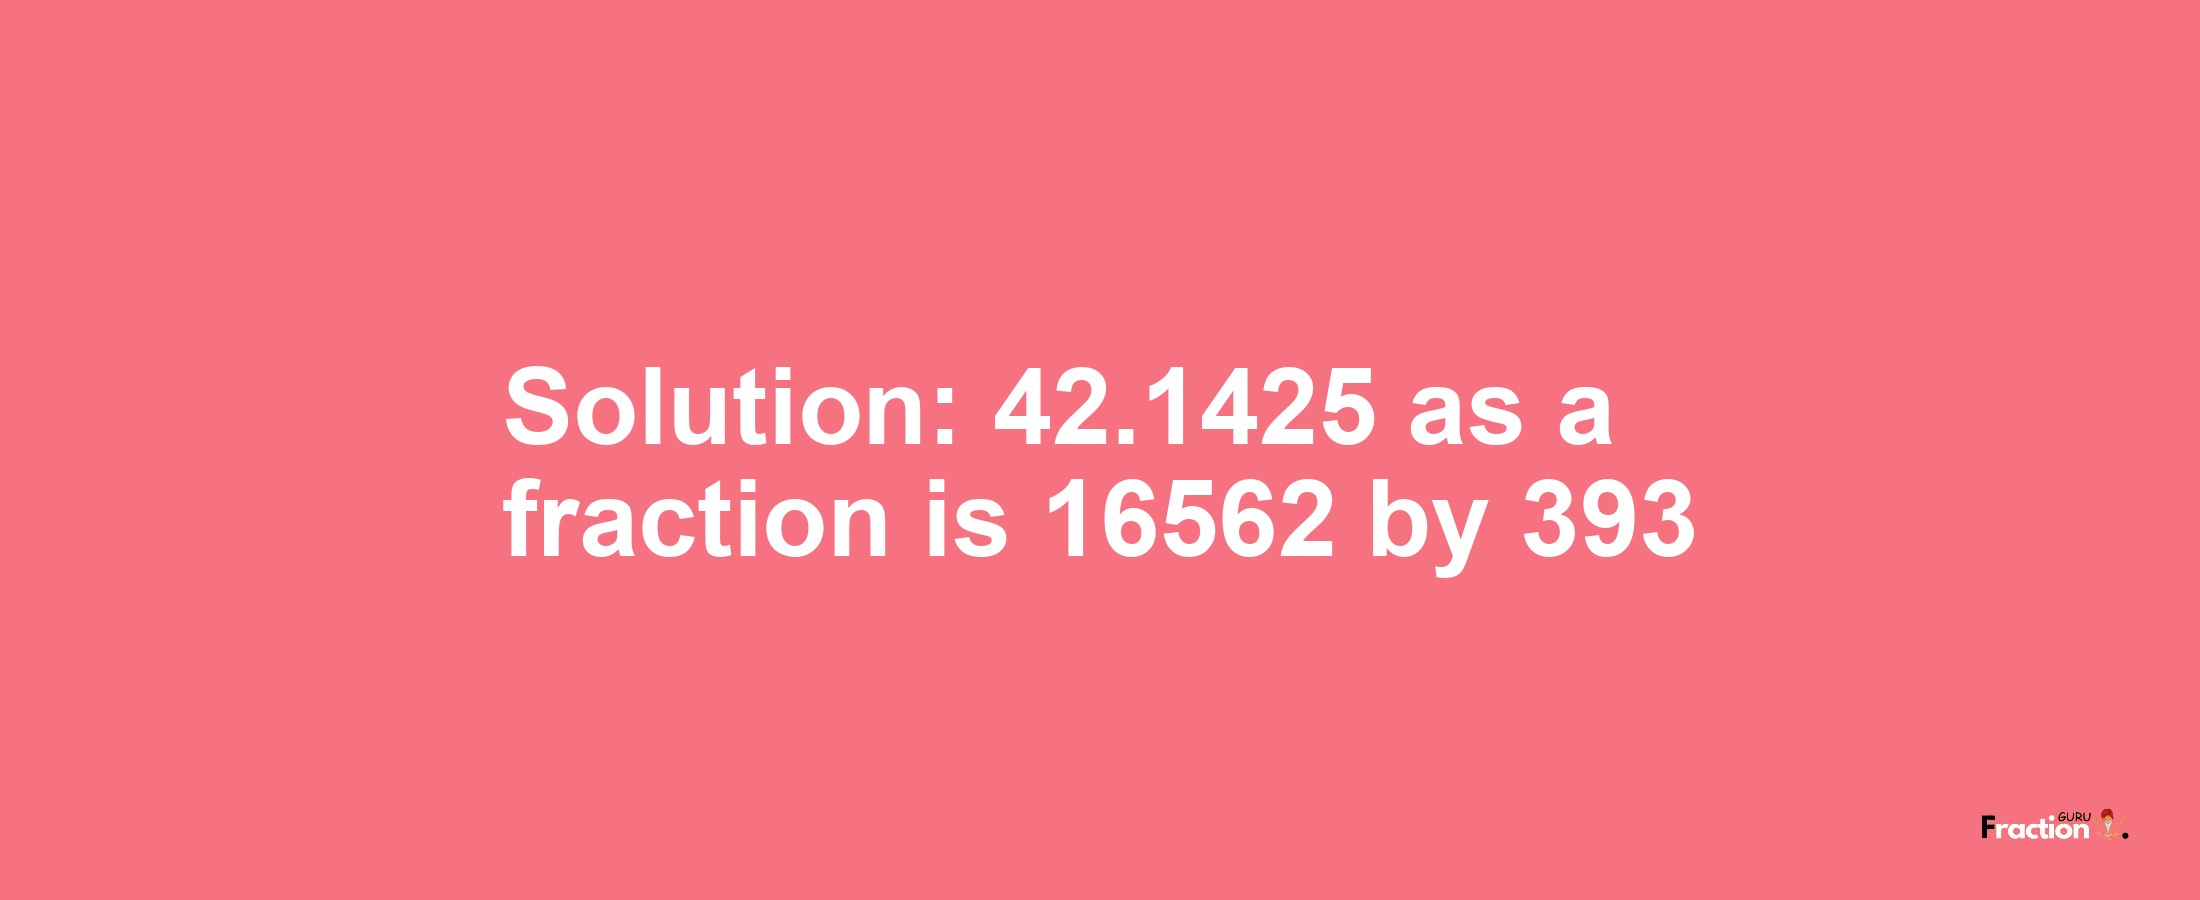 Solution:42.1425 as a fraction is 16562/393